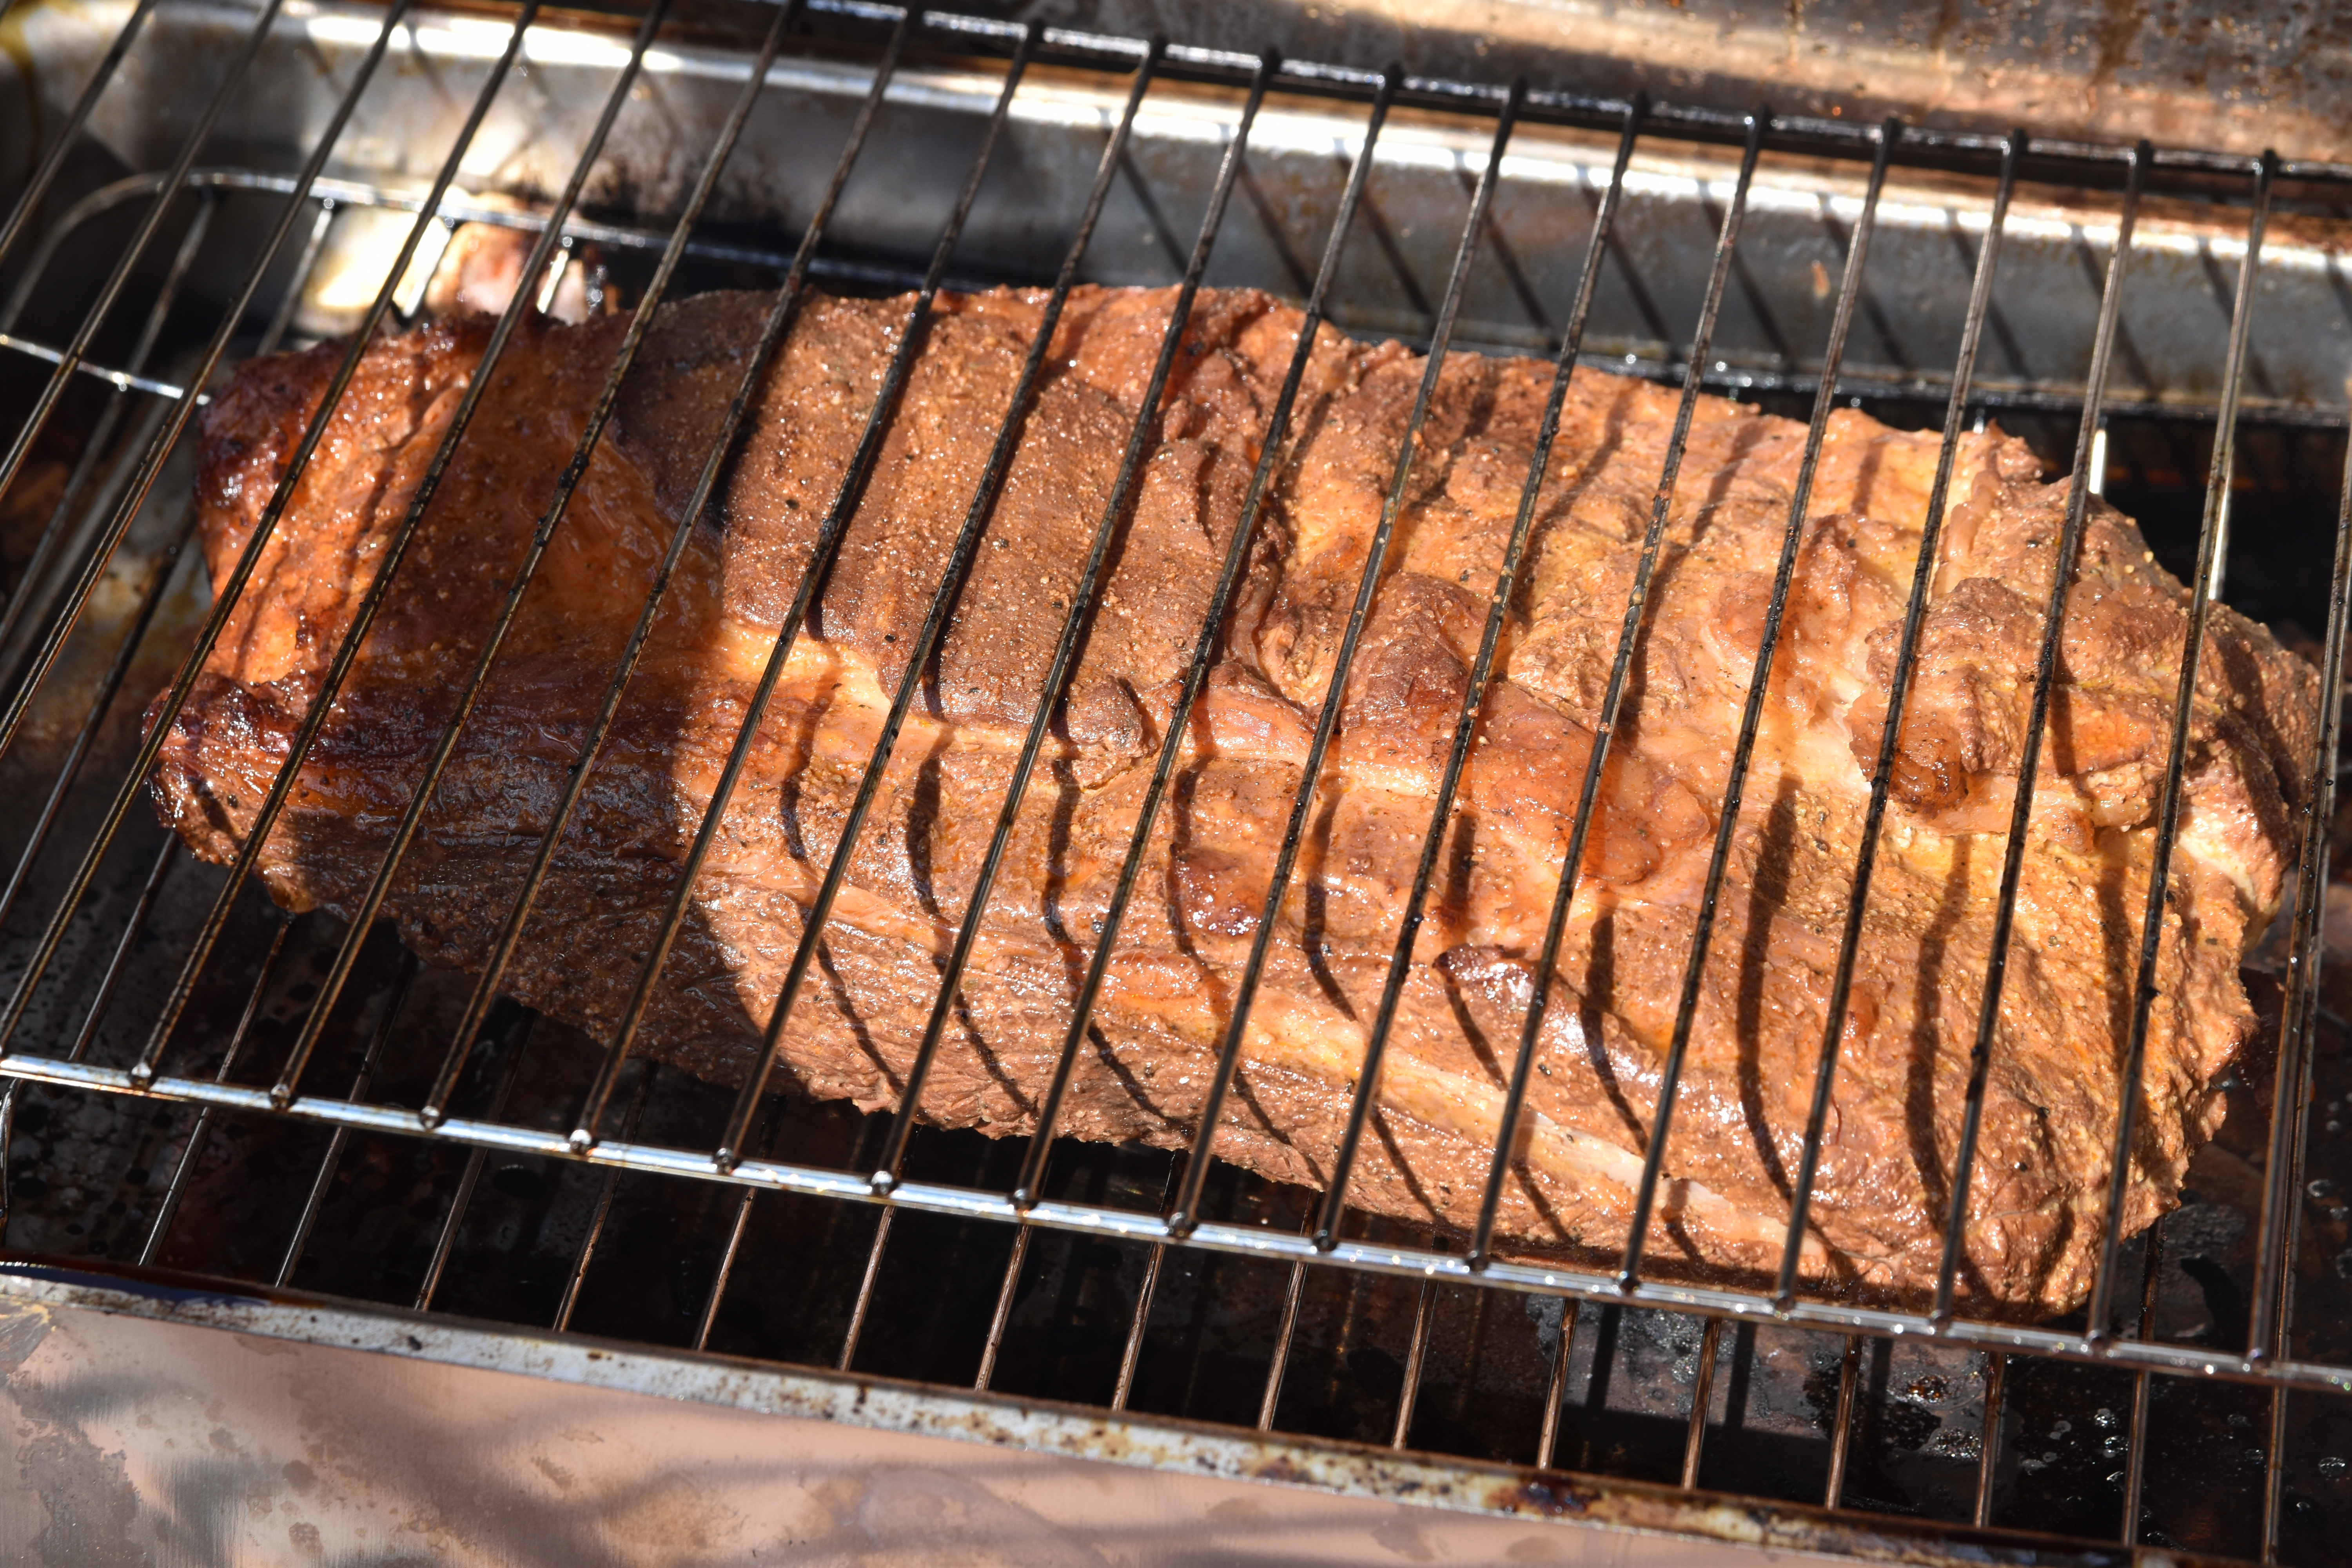 Two pounds of brownish brisket on a smoker's rack.